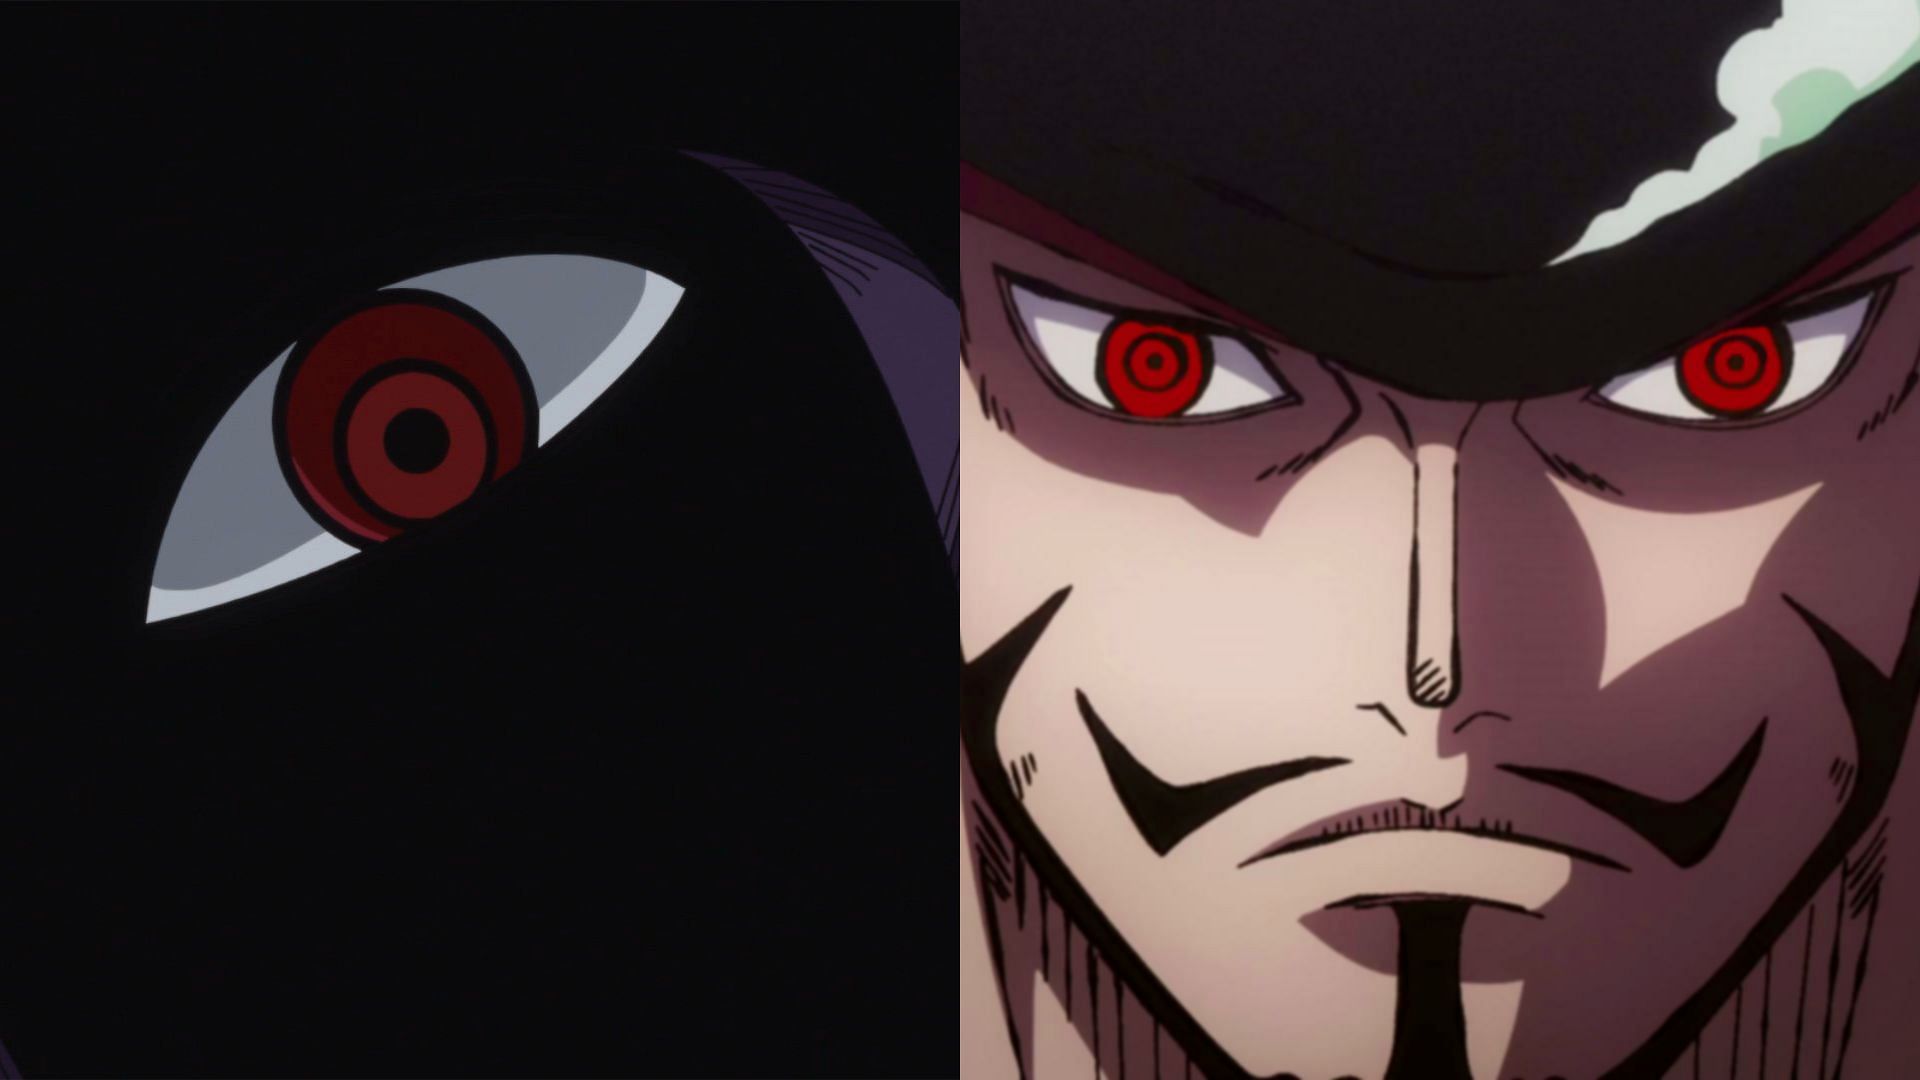 Admittedly, Imu and Mihawk have a frightening glance (Image via Toei Animation, One Piece)